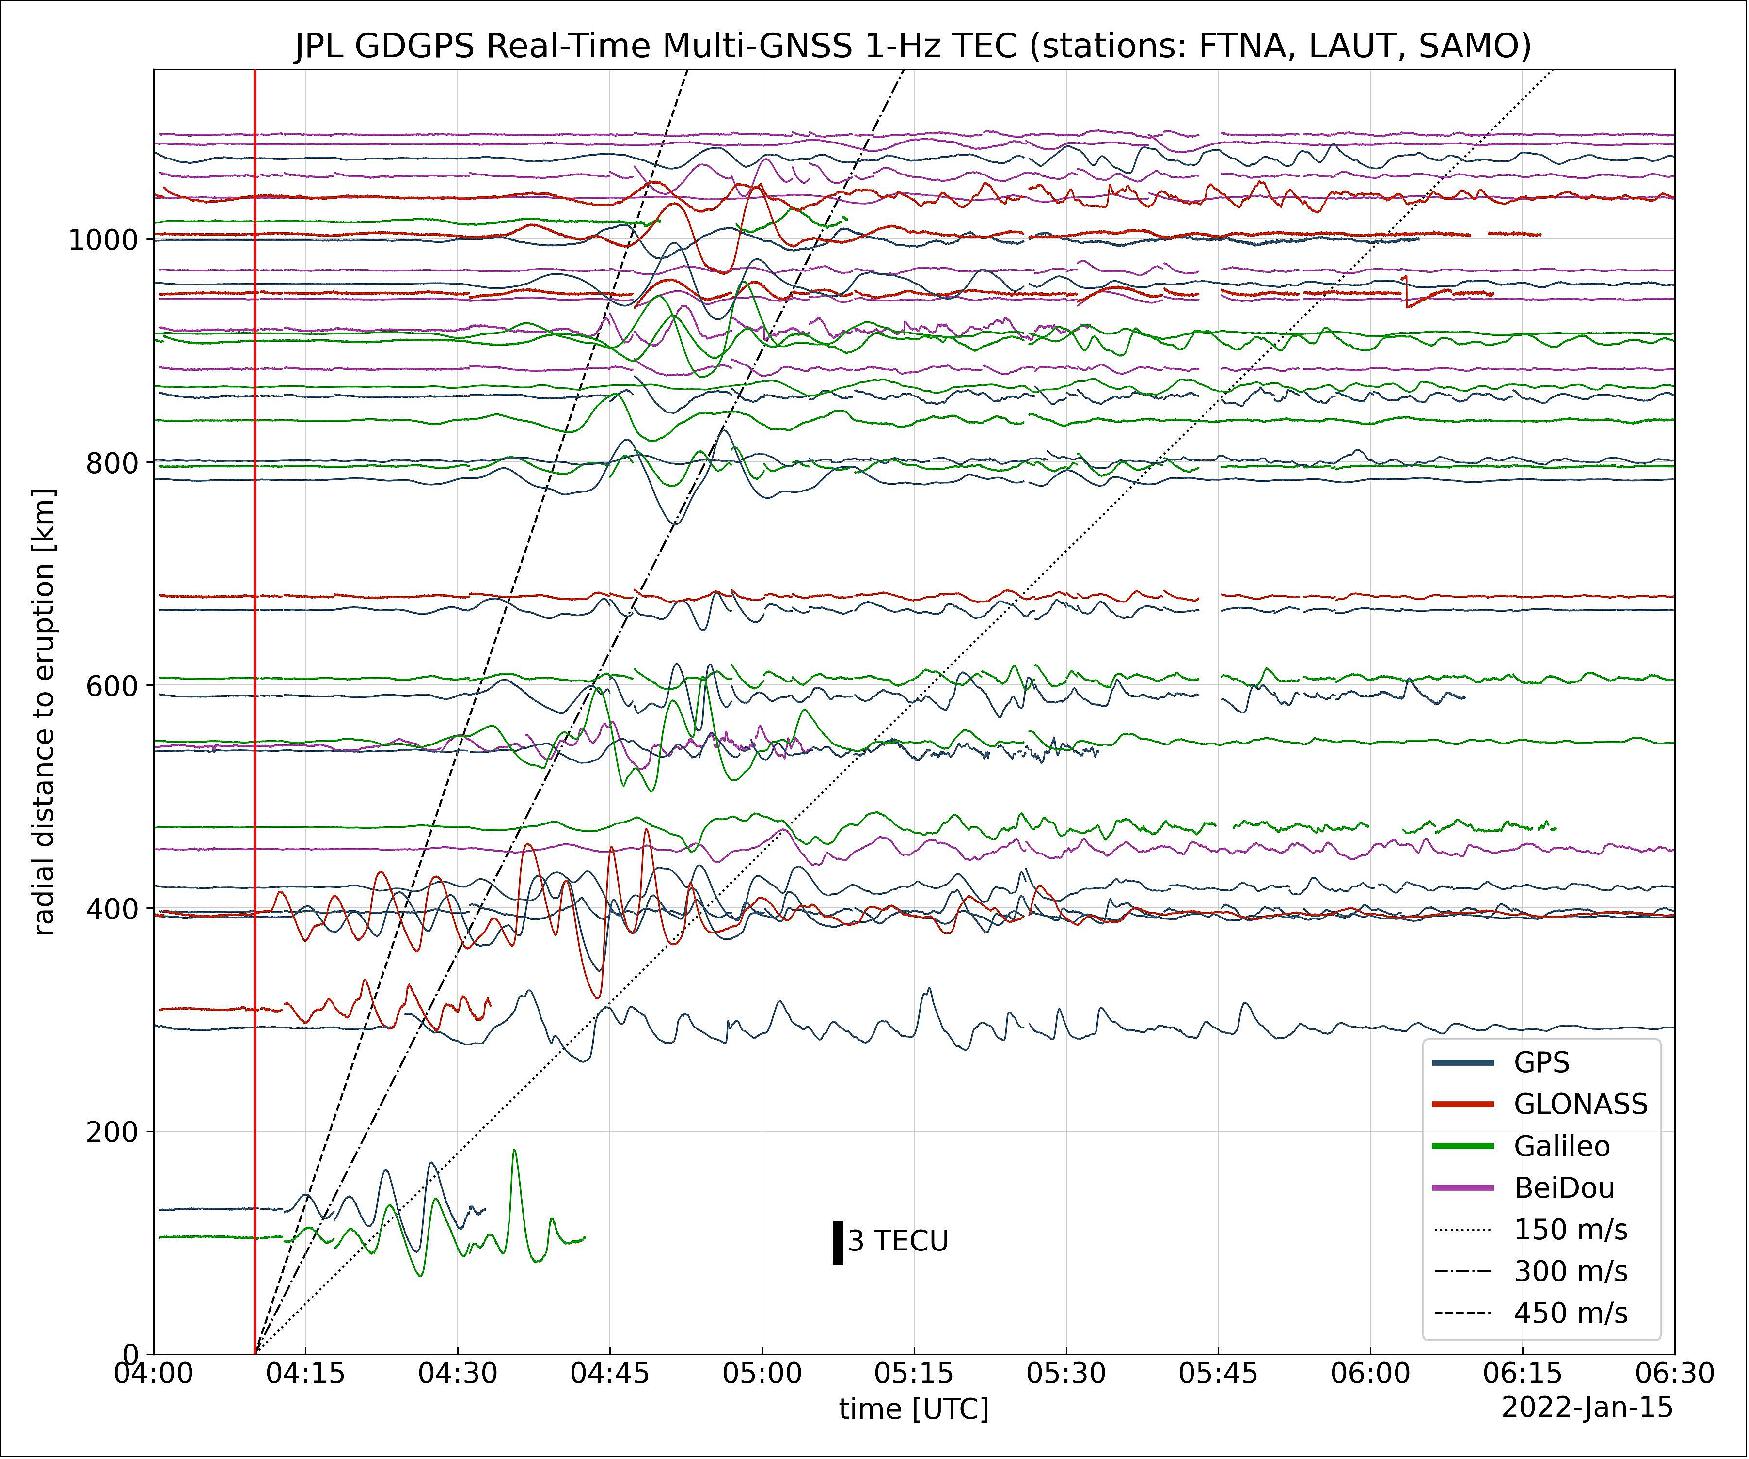 Figure 10: In this image, the vertical red line in the data plot indicates the time of the eruption. The horizontal squiggles show electron density profiles over time, as recorded in the signals of four GNSS constellations, or groups of satellites: GPS, GLONASS, Galileo, and BeiDou. The slanted dashed and dotted lines indicate the velocity of the waves (image credit: NASA/JPL-Caltech/GDGPS)